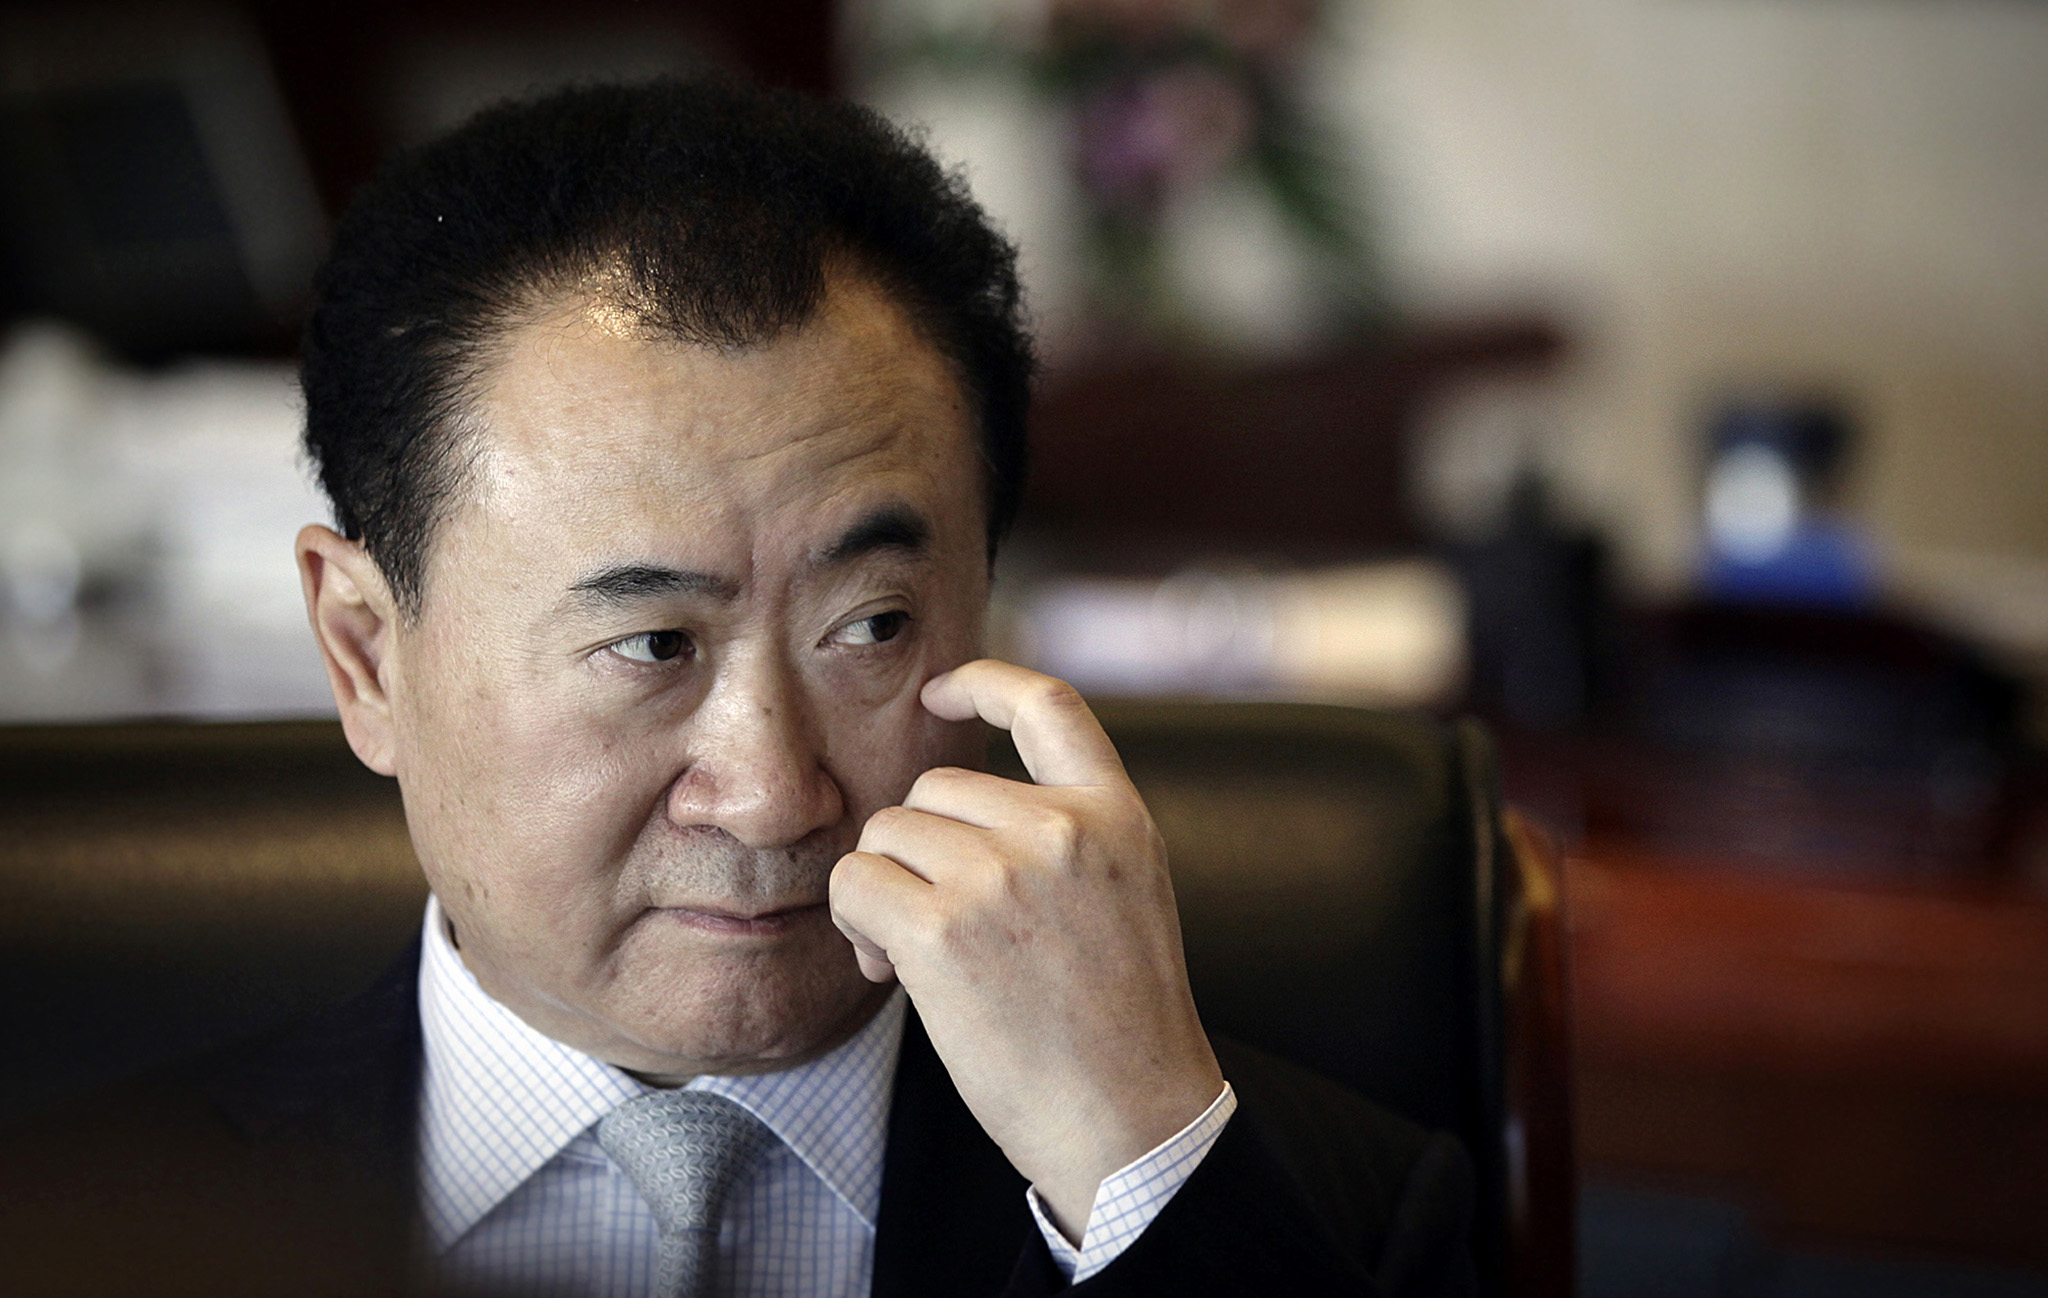 Wang Jianlin, chairman of Dalian Wanda Group, touches his face during an interview at his office in the company's headquarters in Beijing in this December 3, 2012 file photo. Chinese property developer Dalian Wanda Group says it can afford to spend as much as $5 billion every year to buy foreign firms or assets, underscoring the rising clout of the firm as it expands abroad. To match Interview CHINA-WANDA/ REUTERS/Suzie Wong/Files (CHINA - Tags: BUSINESS PROFILE HEADSHOT REAL ESTATE CONSTRUCTION)